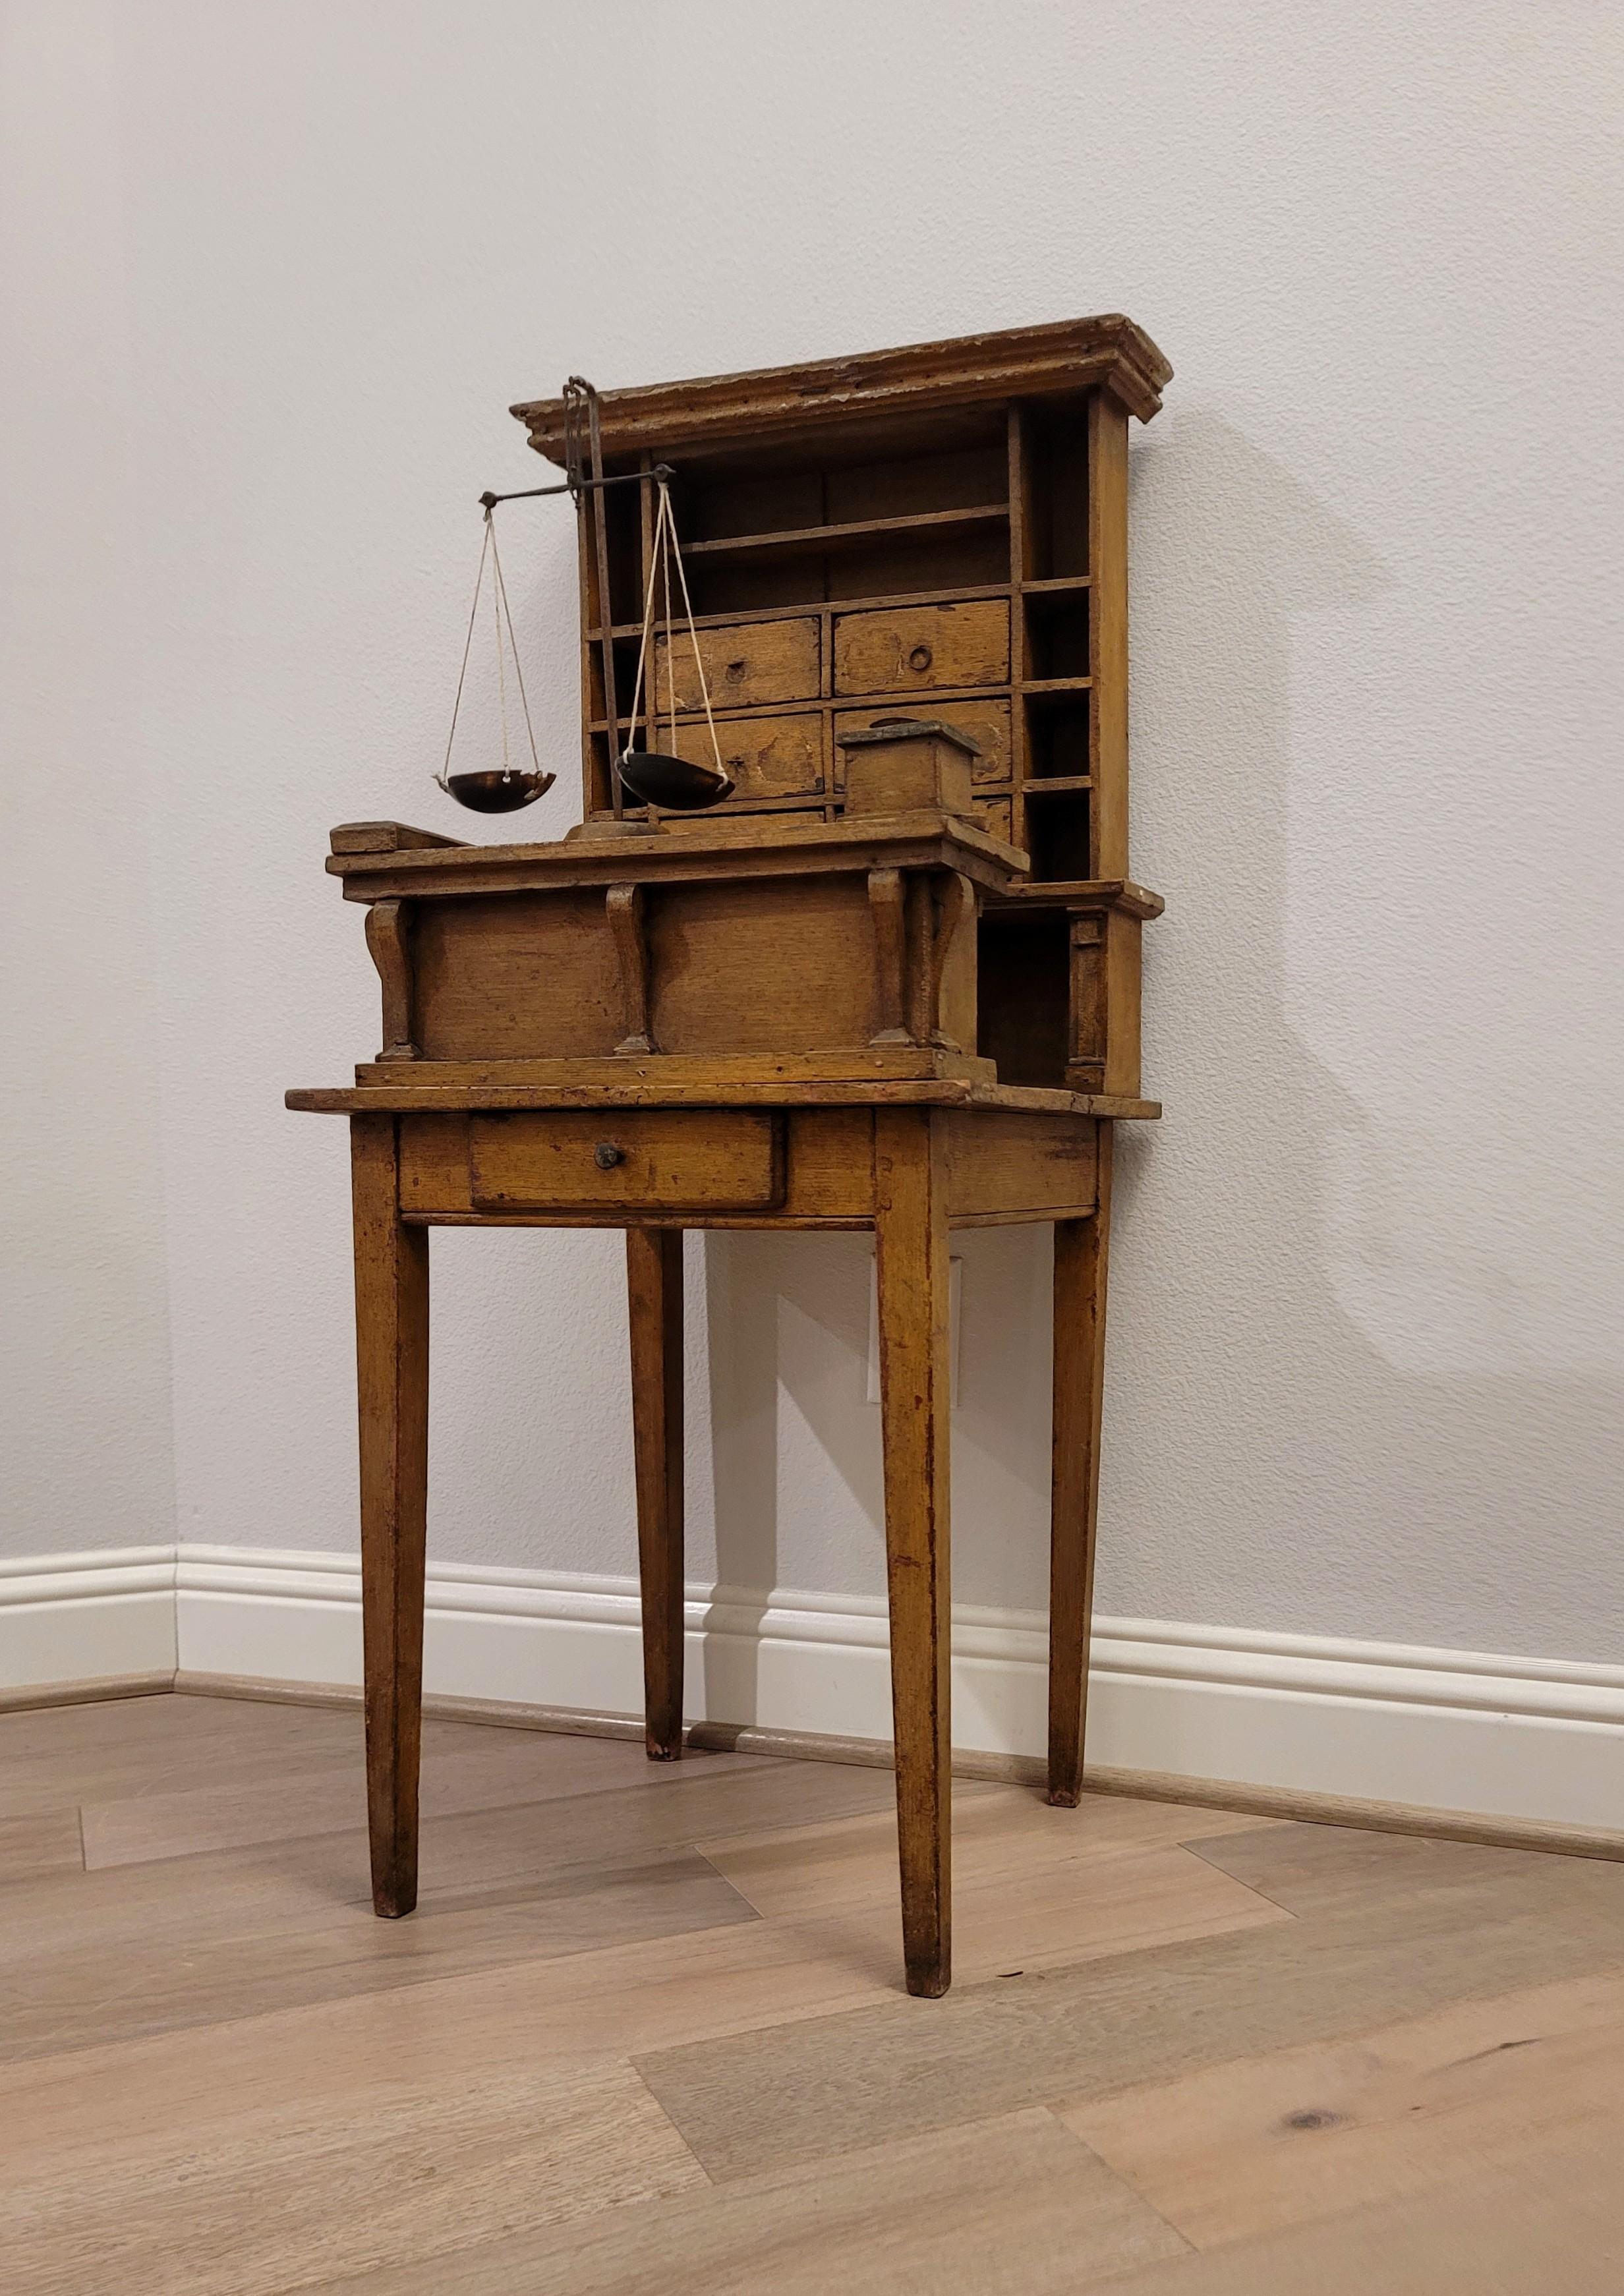 Industrial Diminutive 19th Century American Mercantile Trade Store Display Model For Sale